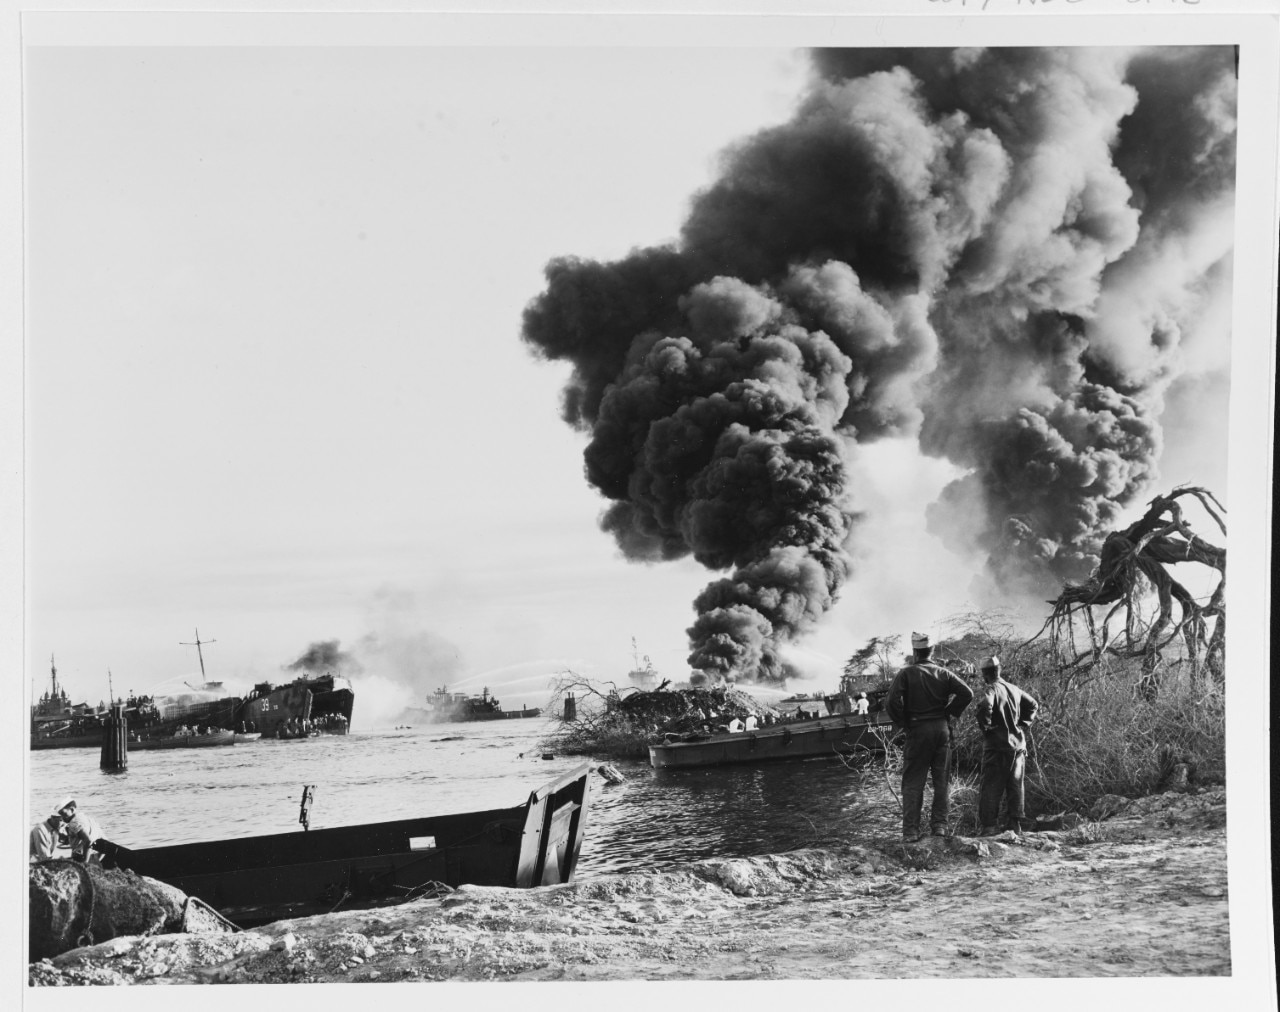 Smoke billows into the sky from two exploded ships that aren’t visible as two men on the shoreline watch. Other ships seen in the distance  fight the fires.